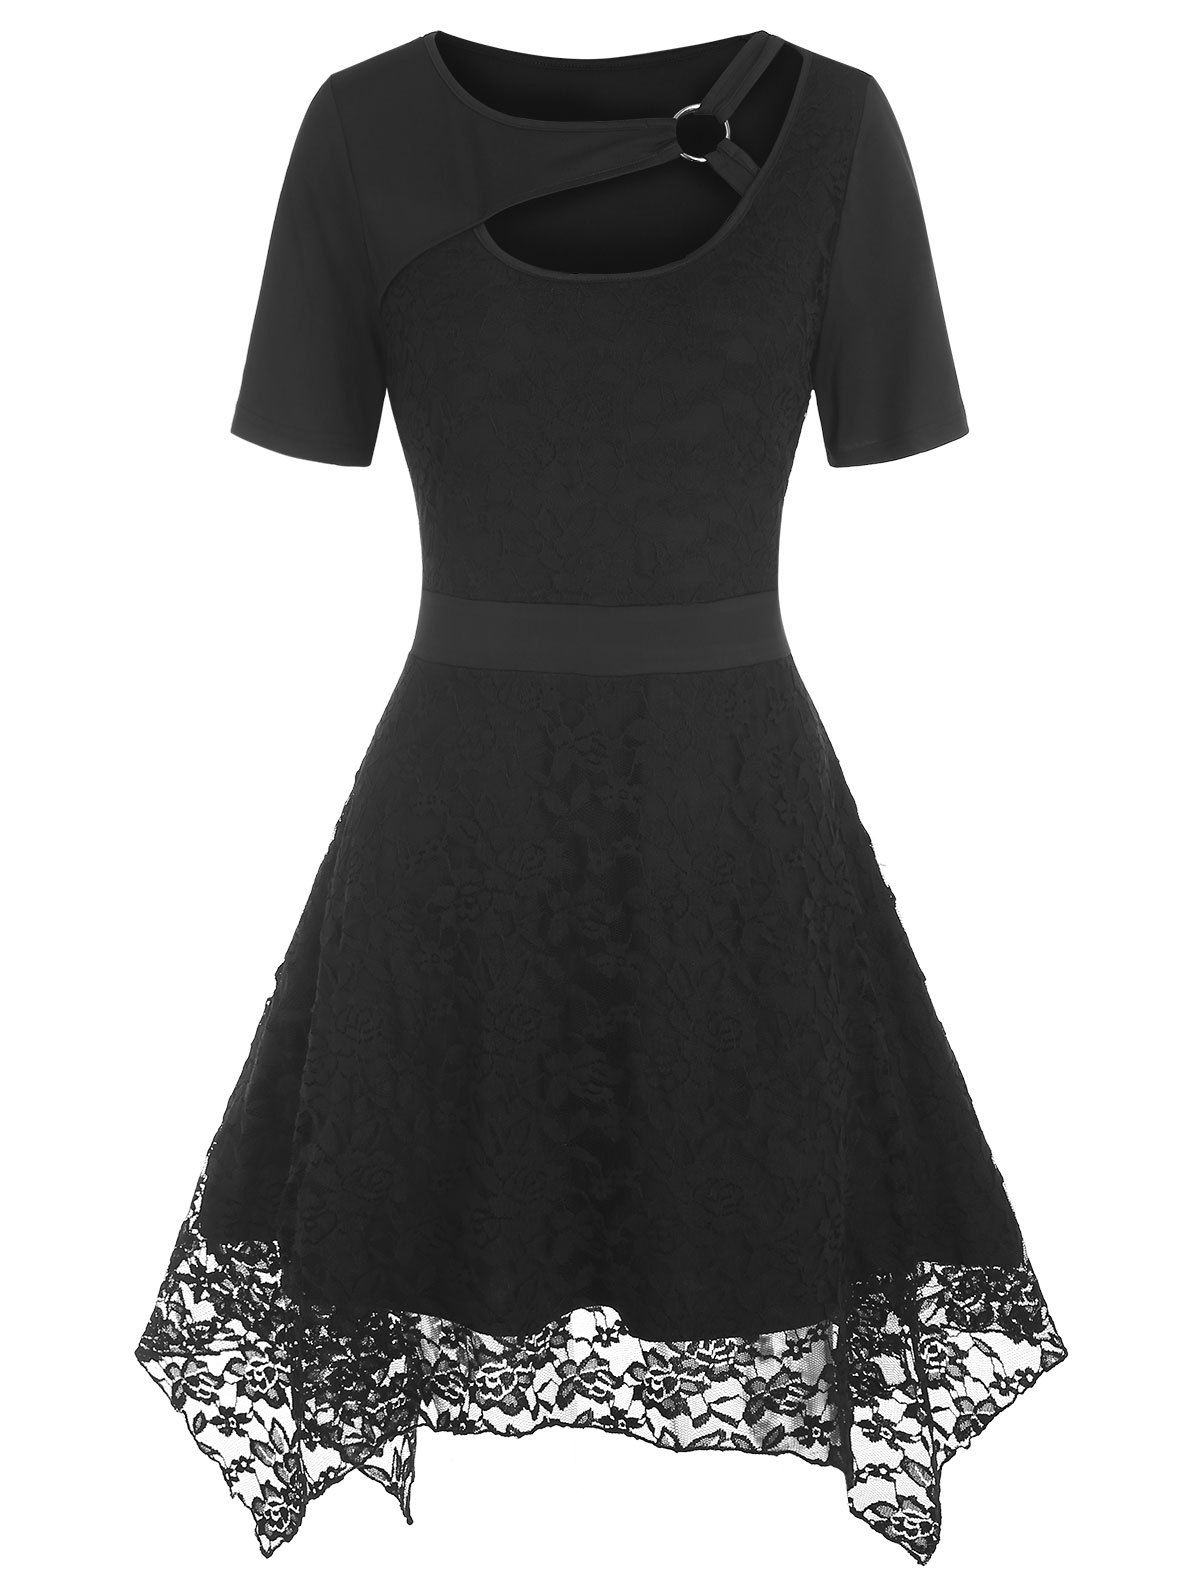 Plus Size Dress A Line Dress Lace Overlay O Ring Cut Out Solid Color Mini Dress - BLACK 2X